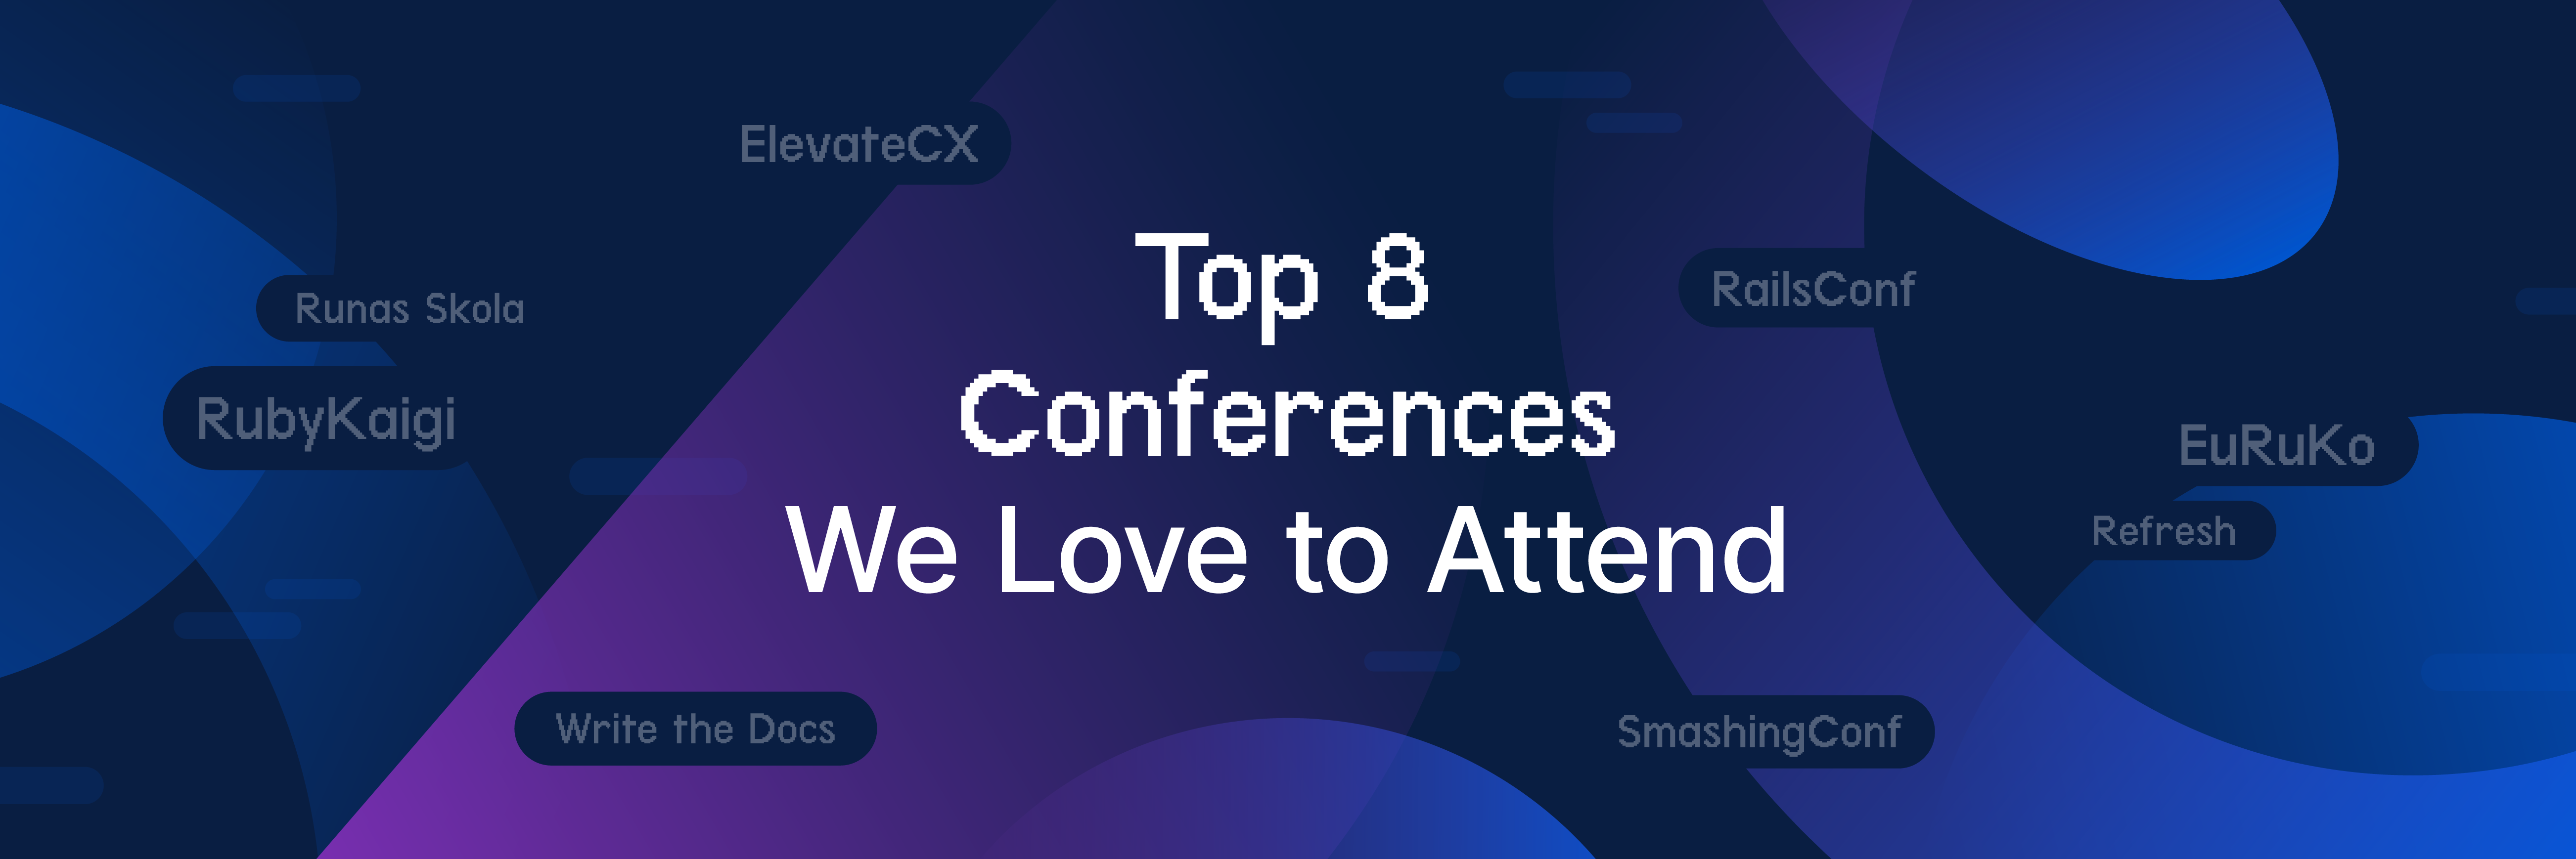 Top 8 Conferences We Love to Attend